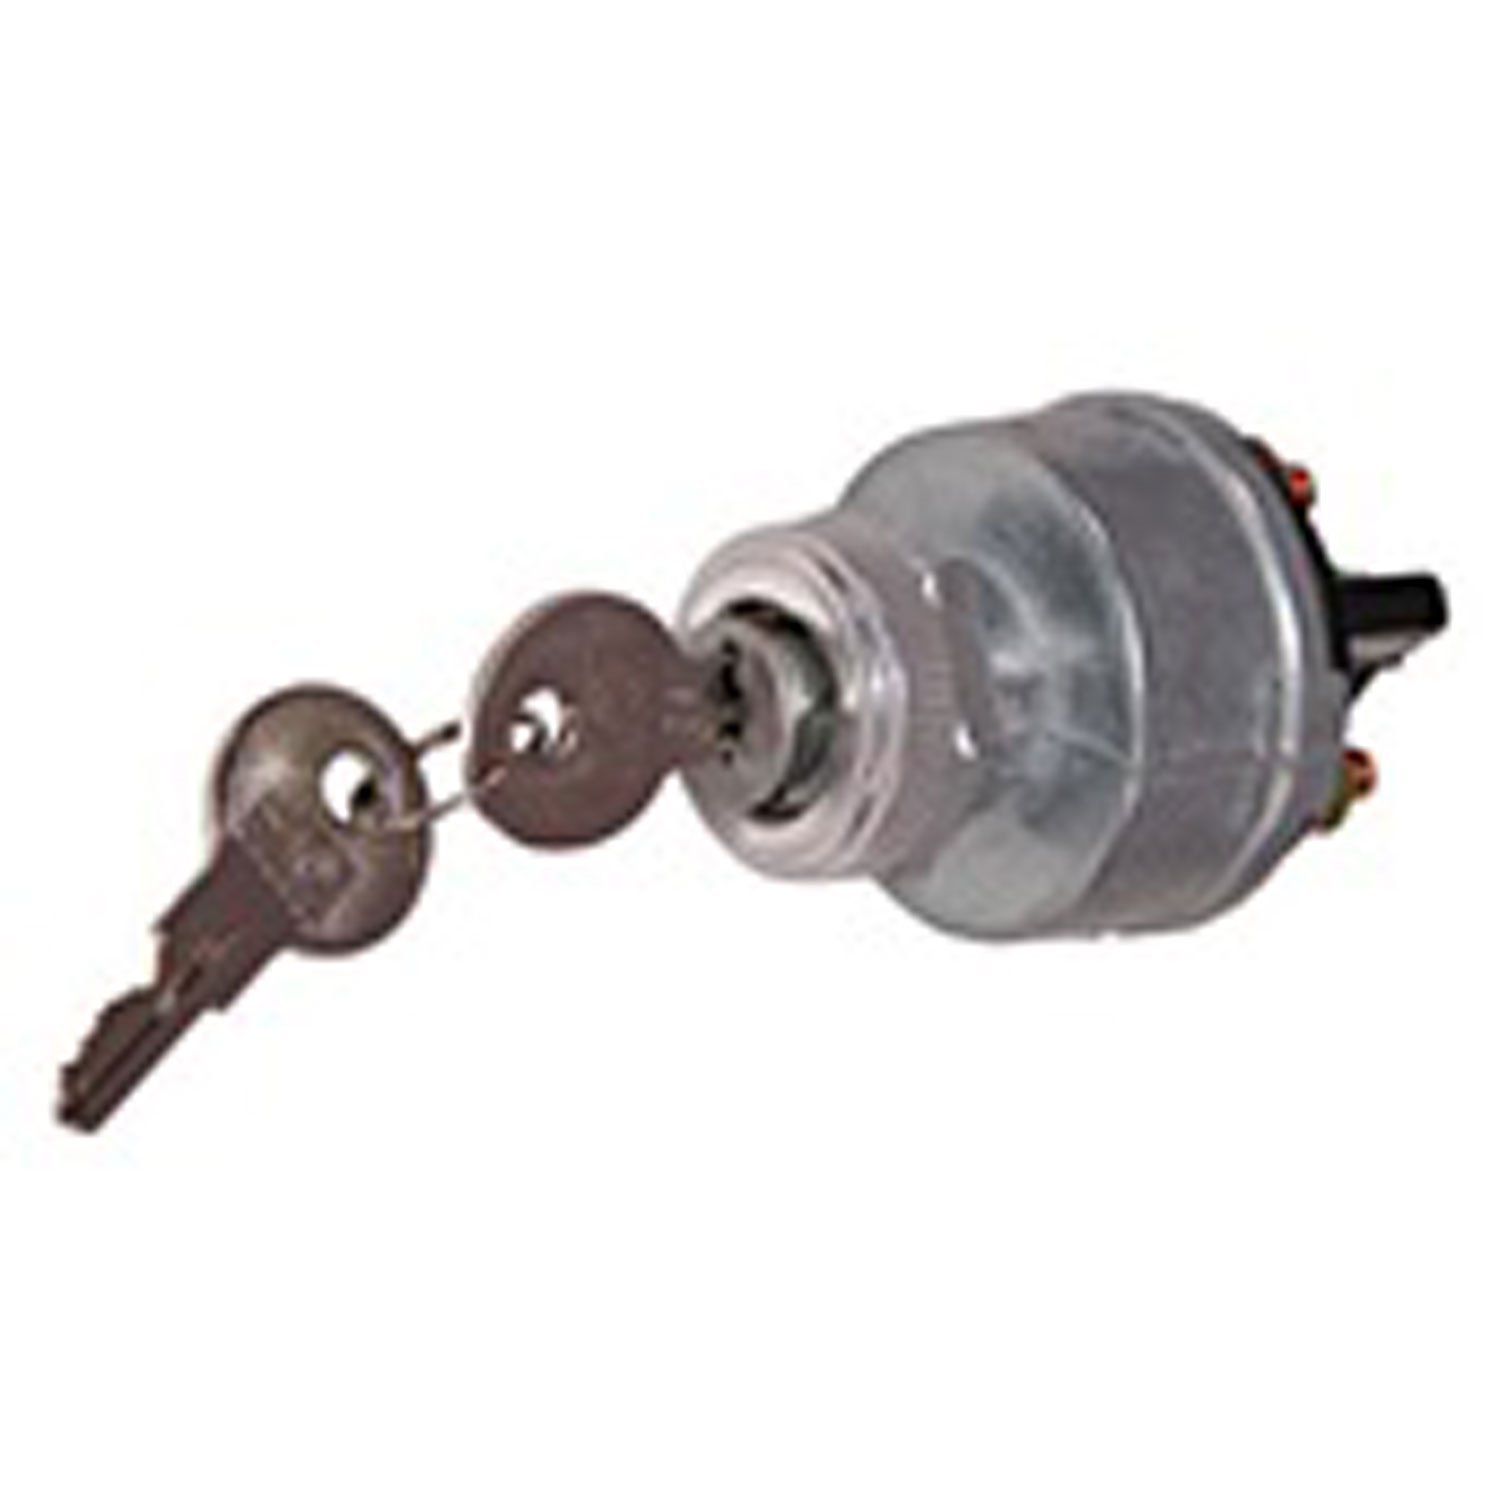 17250.01 Ignition Lock Cylinder with Keys for Jeep CJ